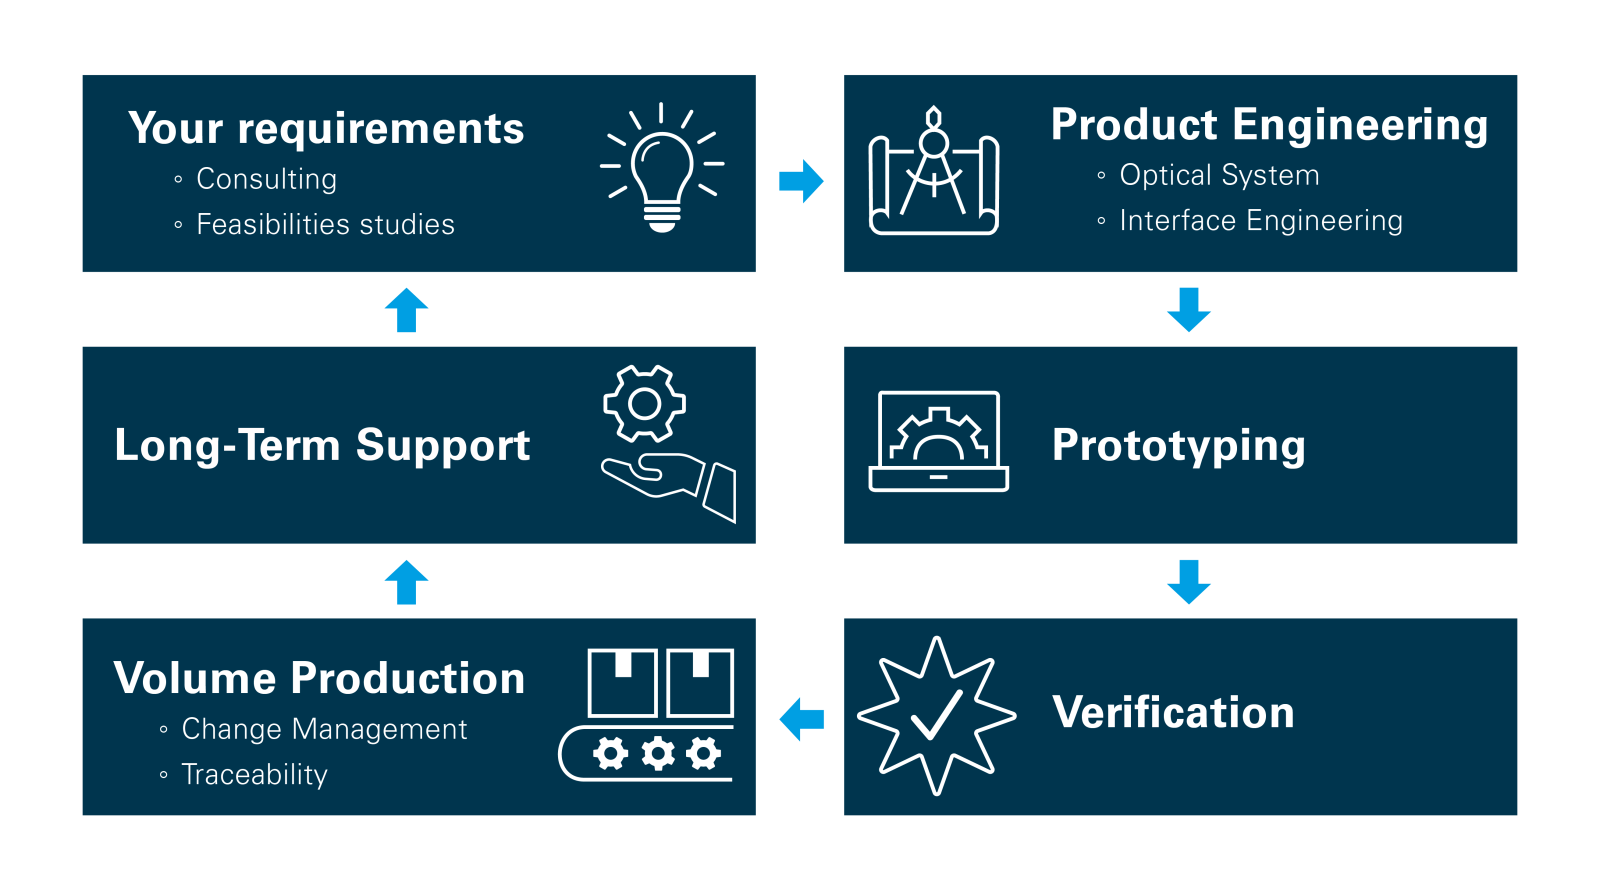 We offer the complete product life cycle. Starting from your requirements, Product Engineering, Prototyping, Verification, Volume Production to Long-Term Support.